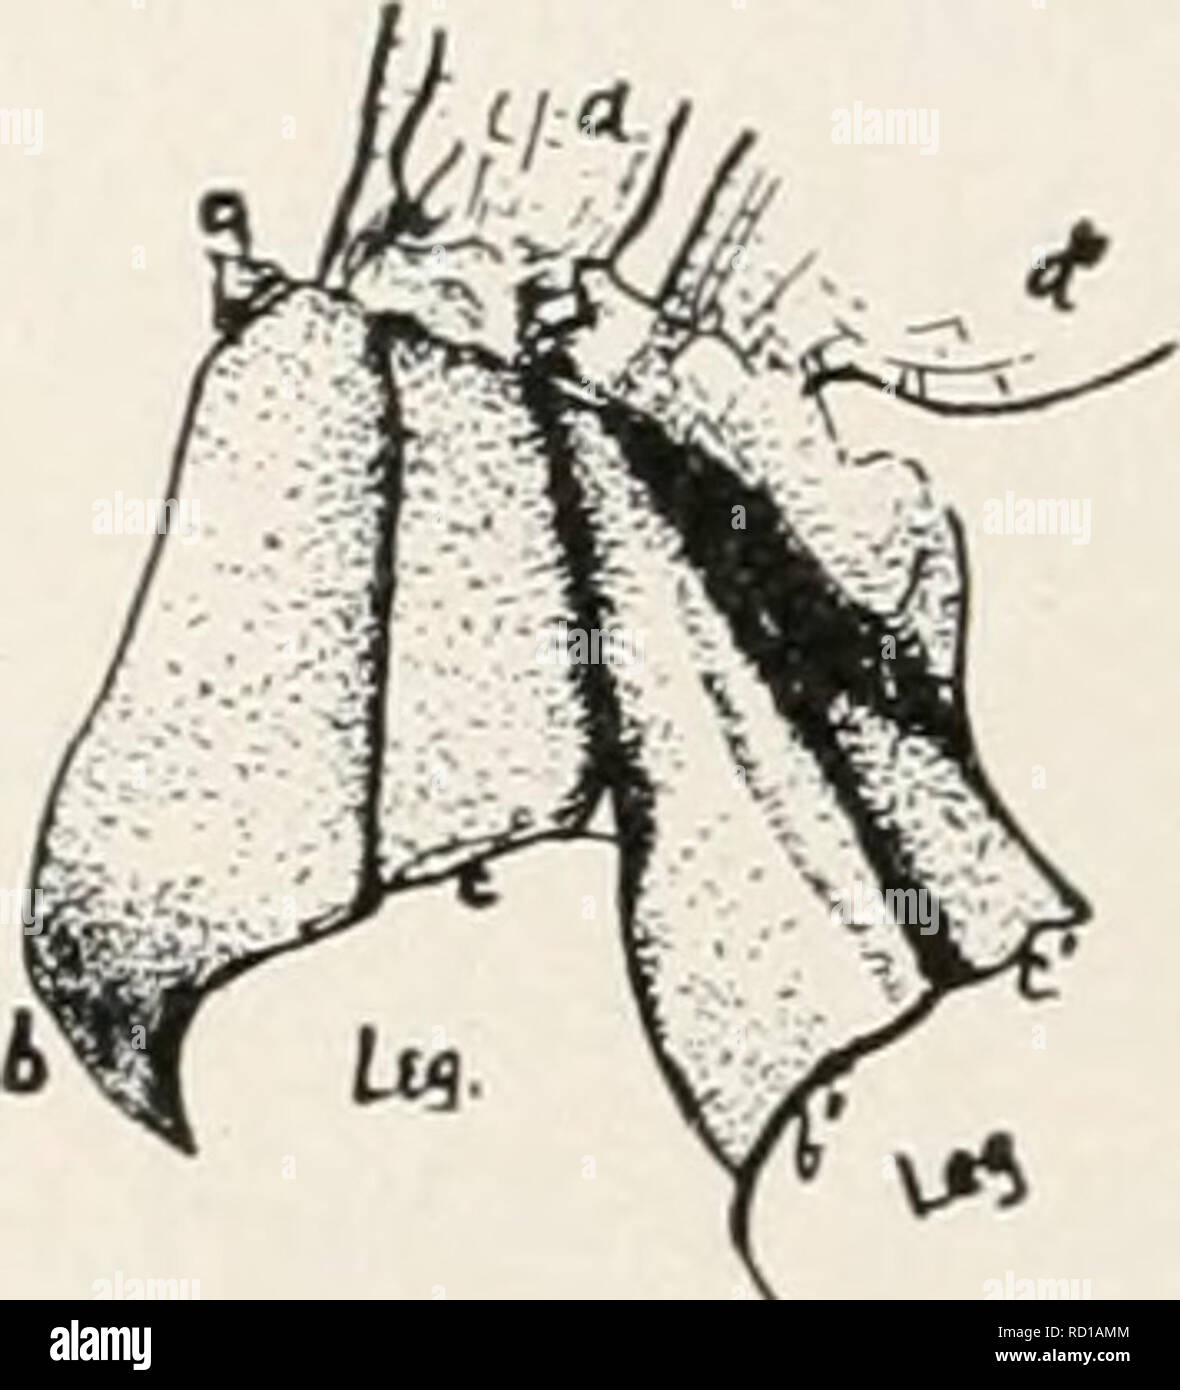 . Elementary studies in insect life. Insects. 262 ELEMENTARY STUDIES IN INSECT LIFE A. B.. FIG. 199. Side view of thorax, larged three times. A, Mesothorax. a, parapteron. 6, episternum. c, epimeron. d, wing. En- B, Metathorax 6', episternum. c', epimeron. d', wing. wings, is the episternum of the mesothorax. ISTote that this part-way surrounds the socket of the leg, and articu- lates with the lateral margin of the sternum beneath. Students at this time will carefully distinguish the difference between color markings and sutures proper. (Fig. 199, Z&gt;.) Parapteron.—Just cepha- lad or in fron Stock Photo